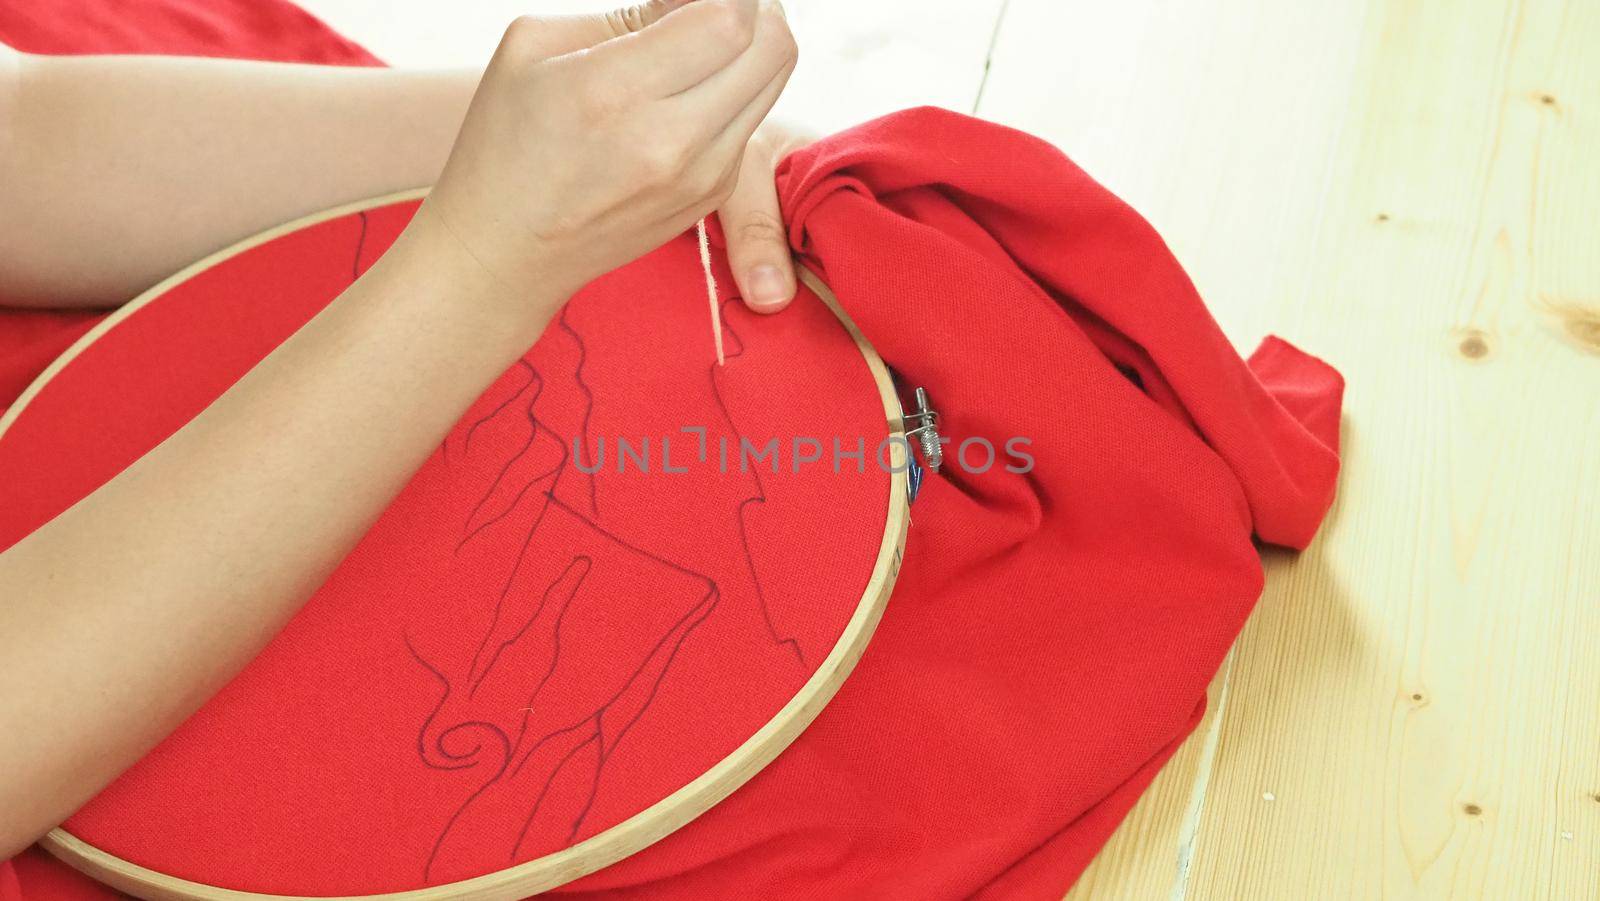 Woman hands and craft work. Embroider sewing by hand. Handicraft work by thread needle sew knit. Wood frame embroidery hoop. Needlework handicraft crafting quarantine leisure concept. 